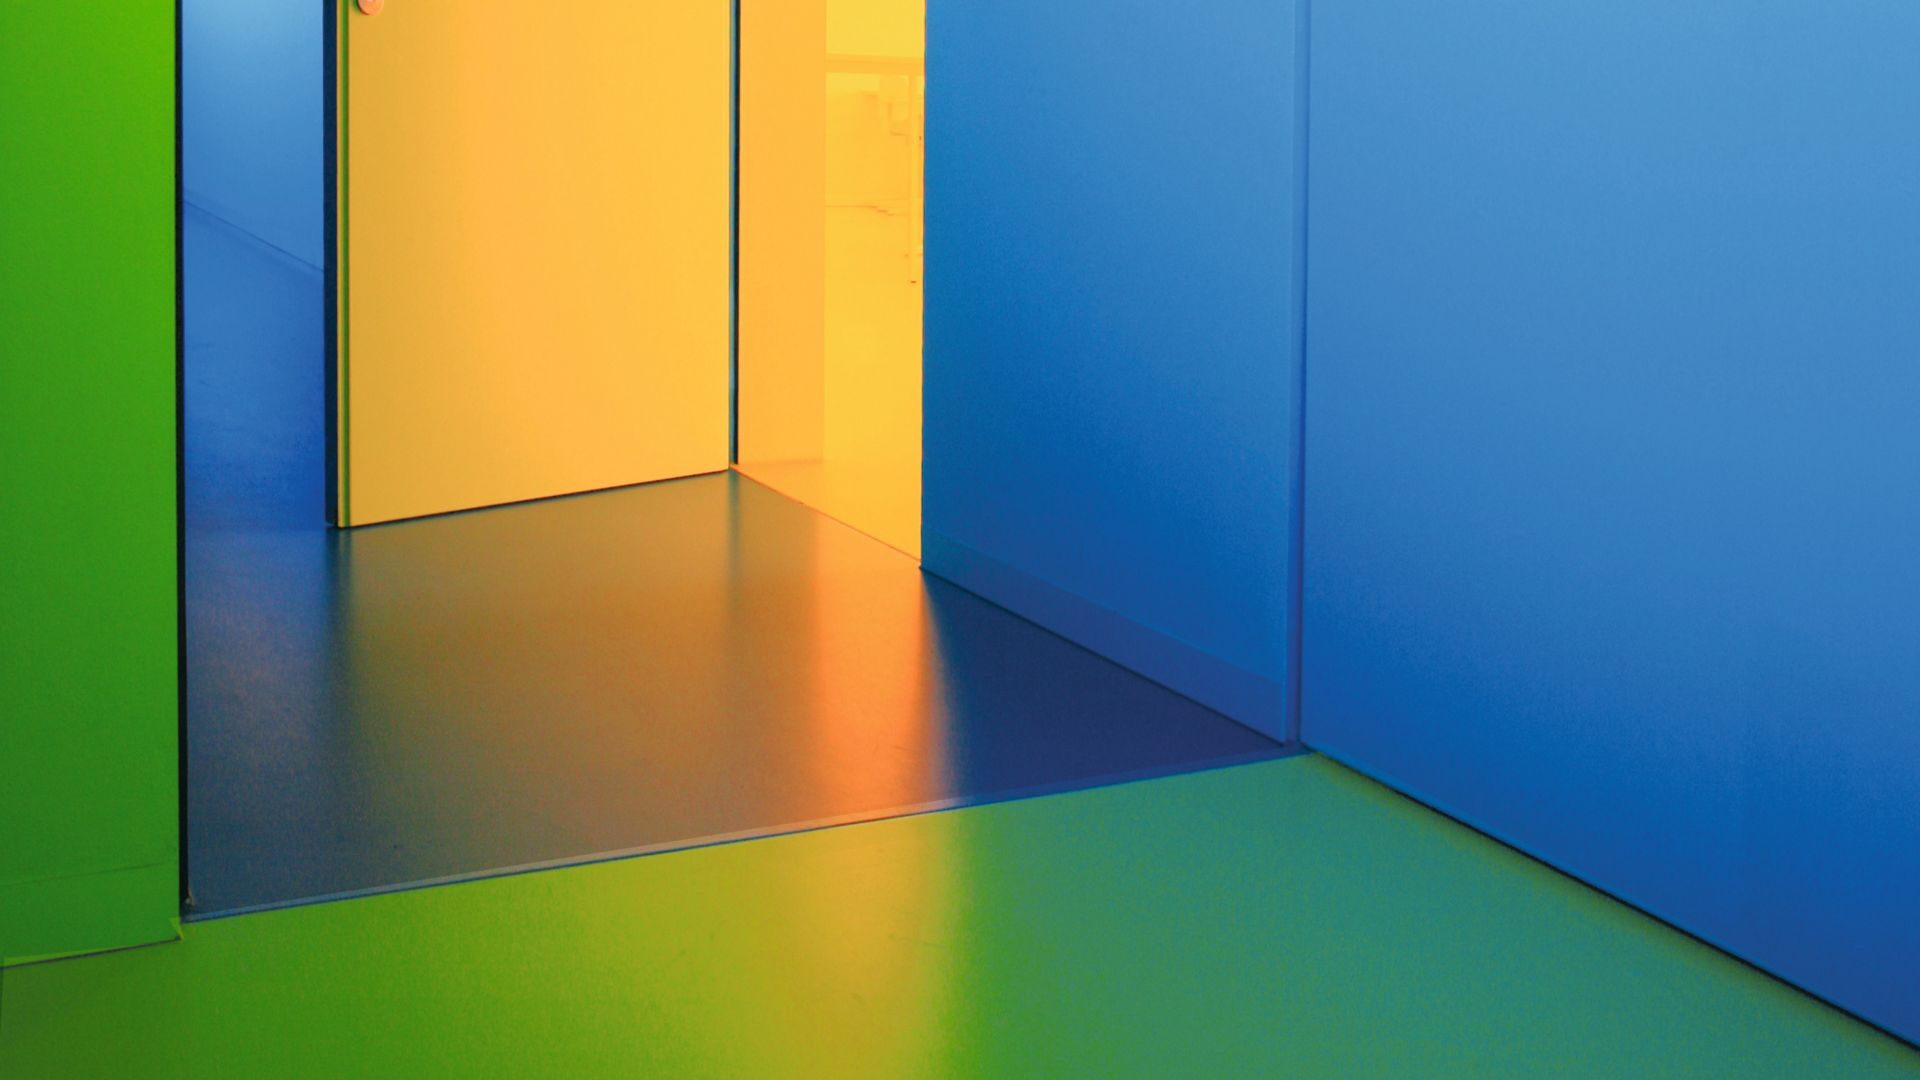 Colorful floor and wall coating made with Sika coating systems